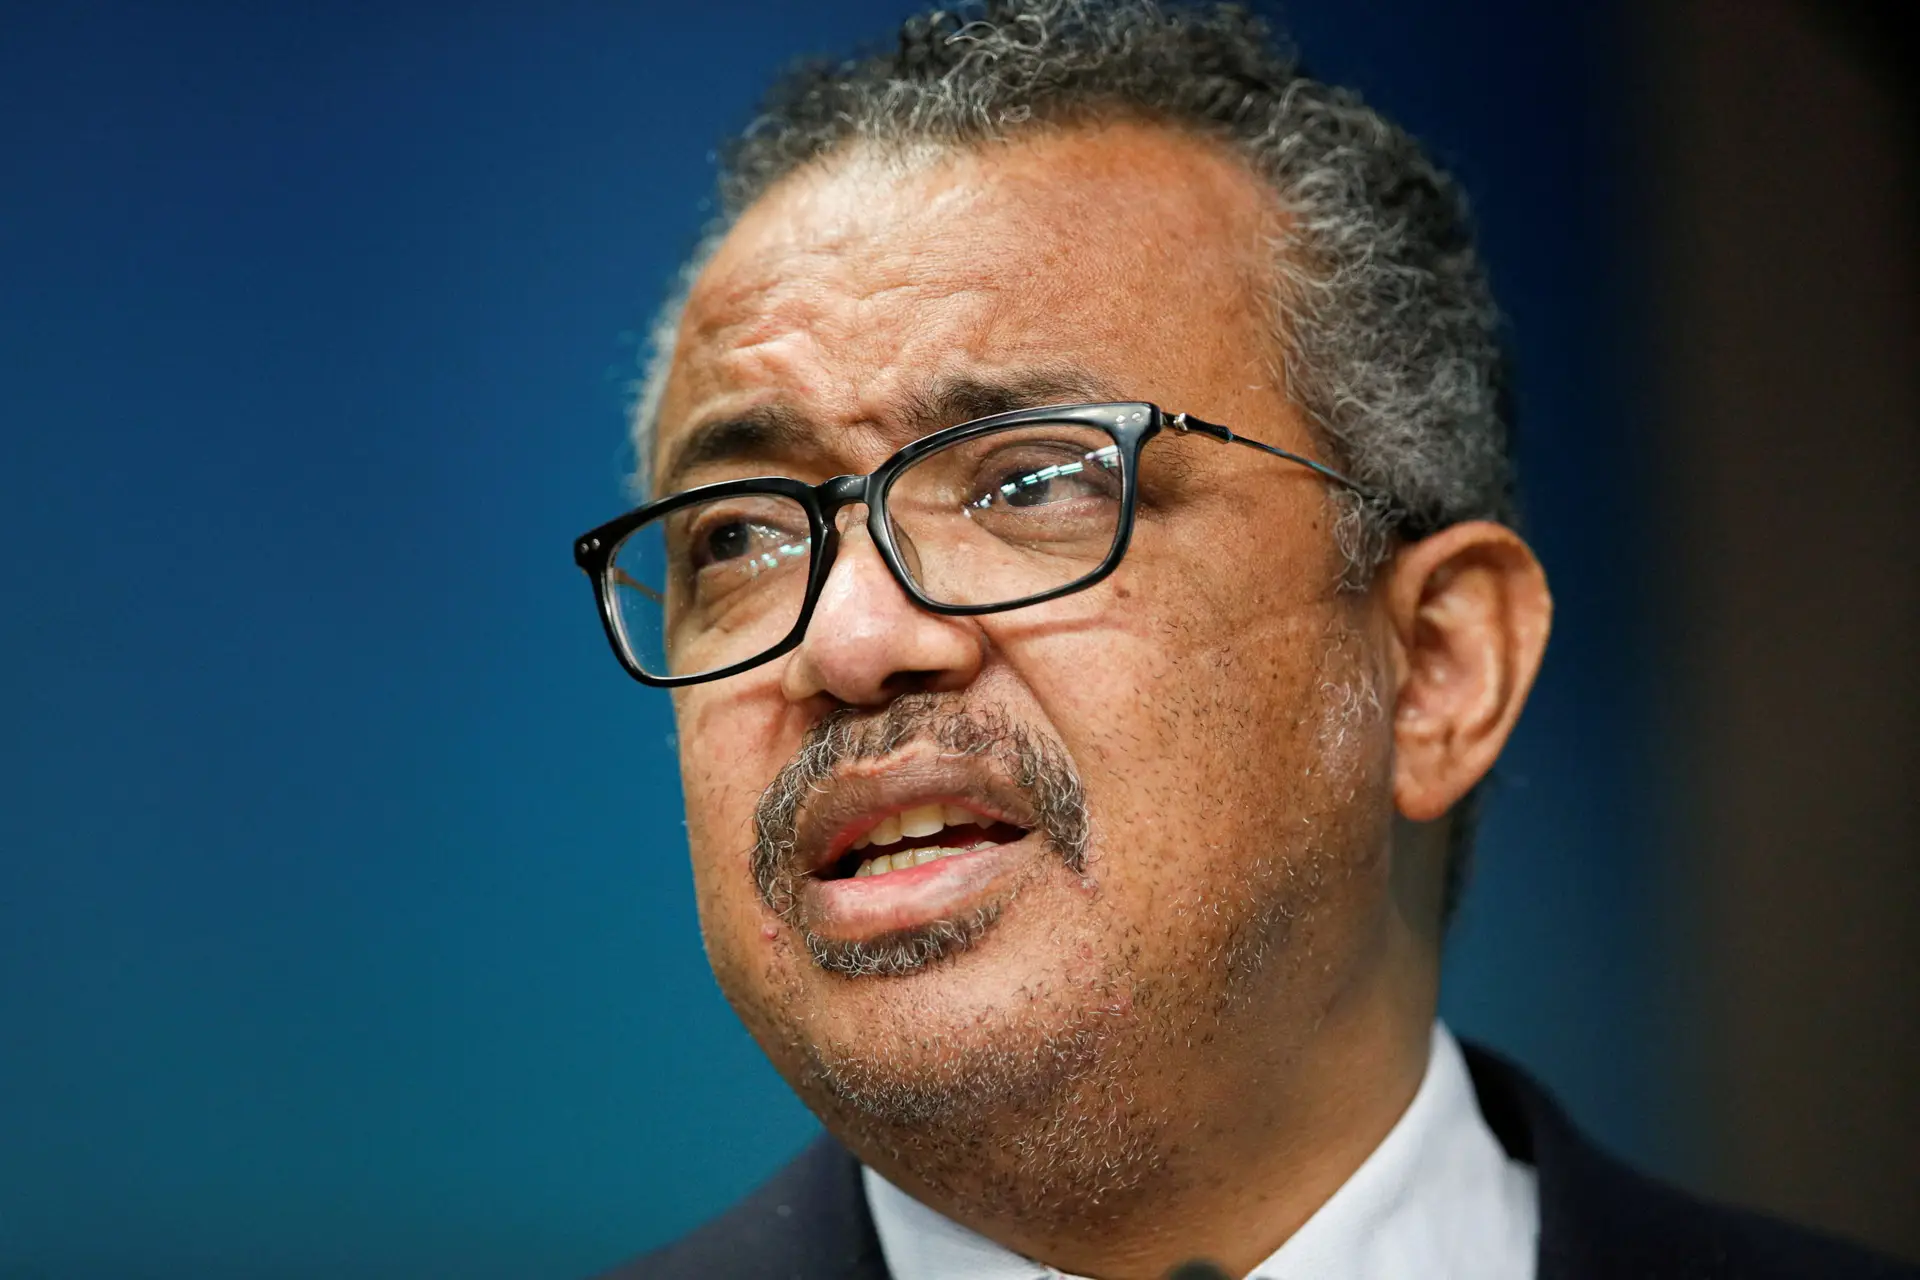 FILE PHOTO: World Health Organization Tedros Adhanom Ghebreyesus gives a statement on the coronavirus disease (COVID-19) vaccination, during a European Union – African Union summit, in Brussels, Belgium February 18, 2022. REUTERS/Johanna Geron/Pool/File Photo